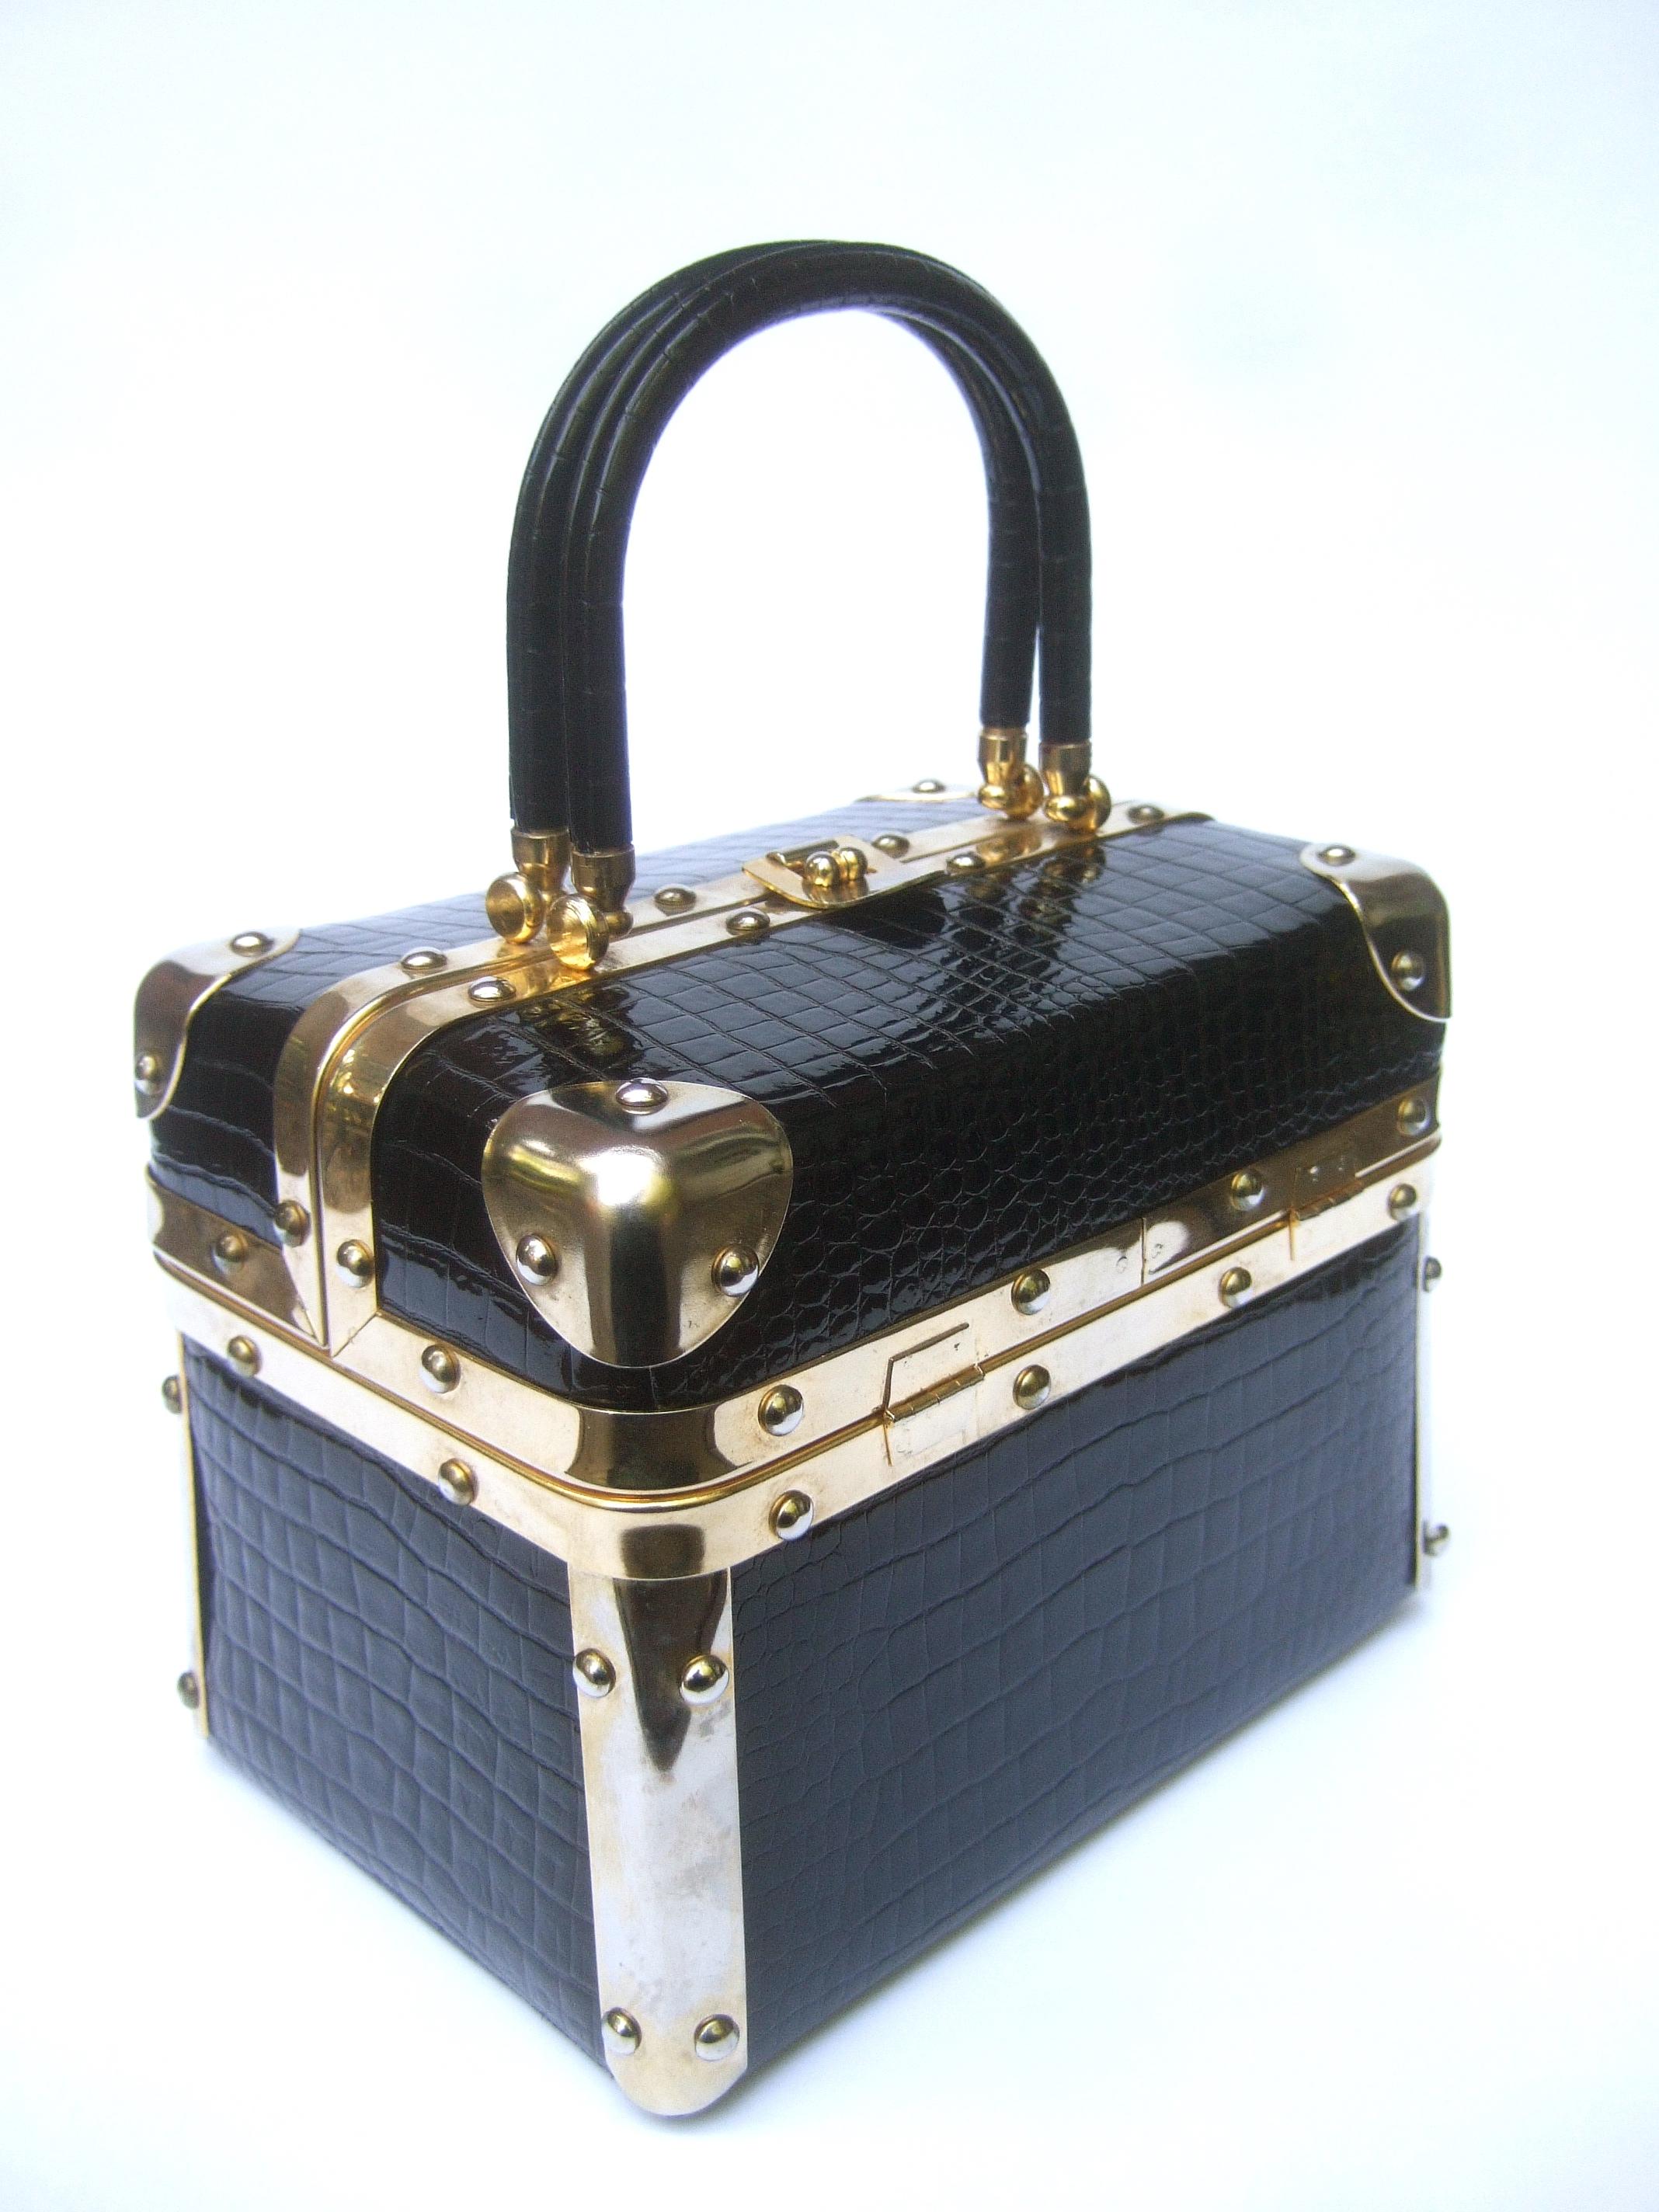 Italian black embossed vinyl box purse designed by Harry Rosenfeld c 1970s
The stylish designer handbag is covered with shiny embossed black vinyl that emulates reptile skin
Framed with sleek gilt metal hardware. Carried with a pair of matching